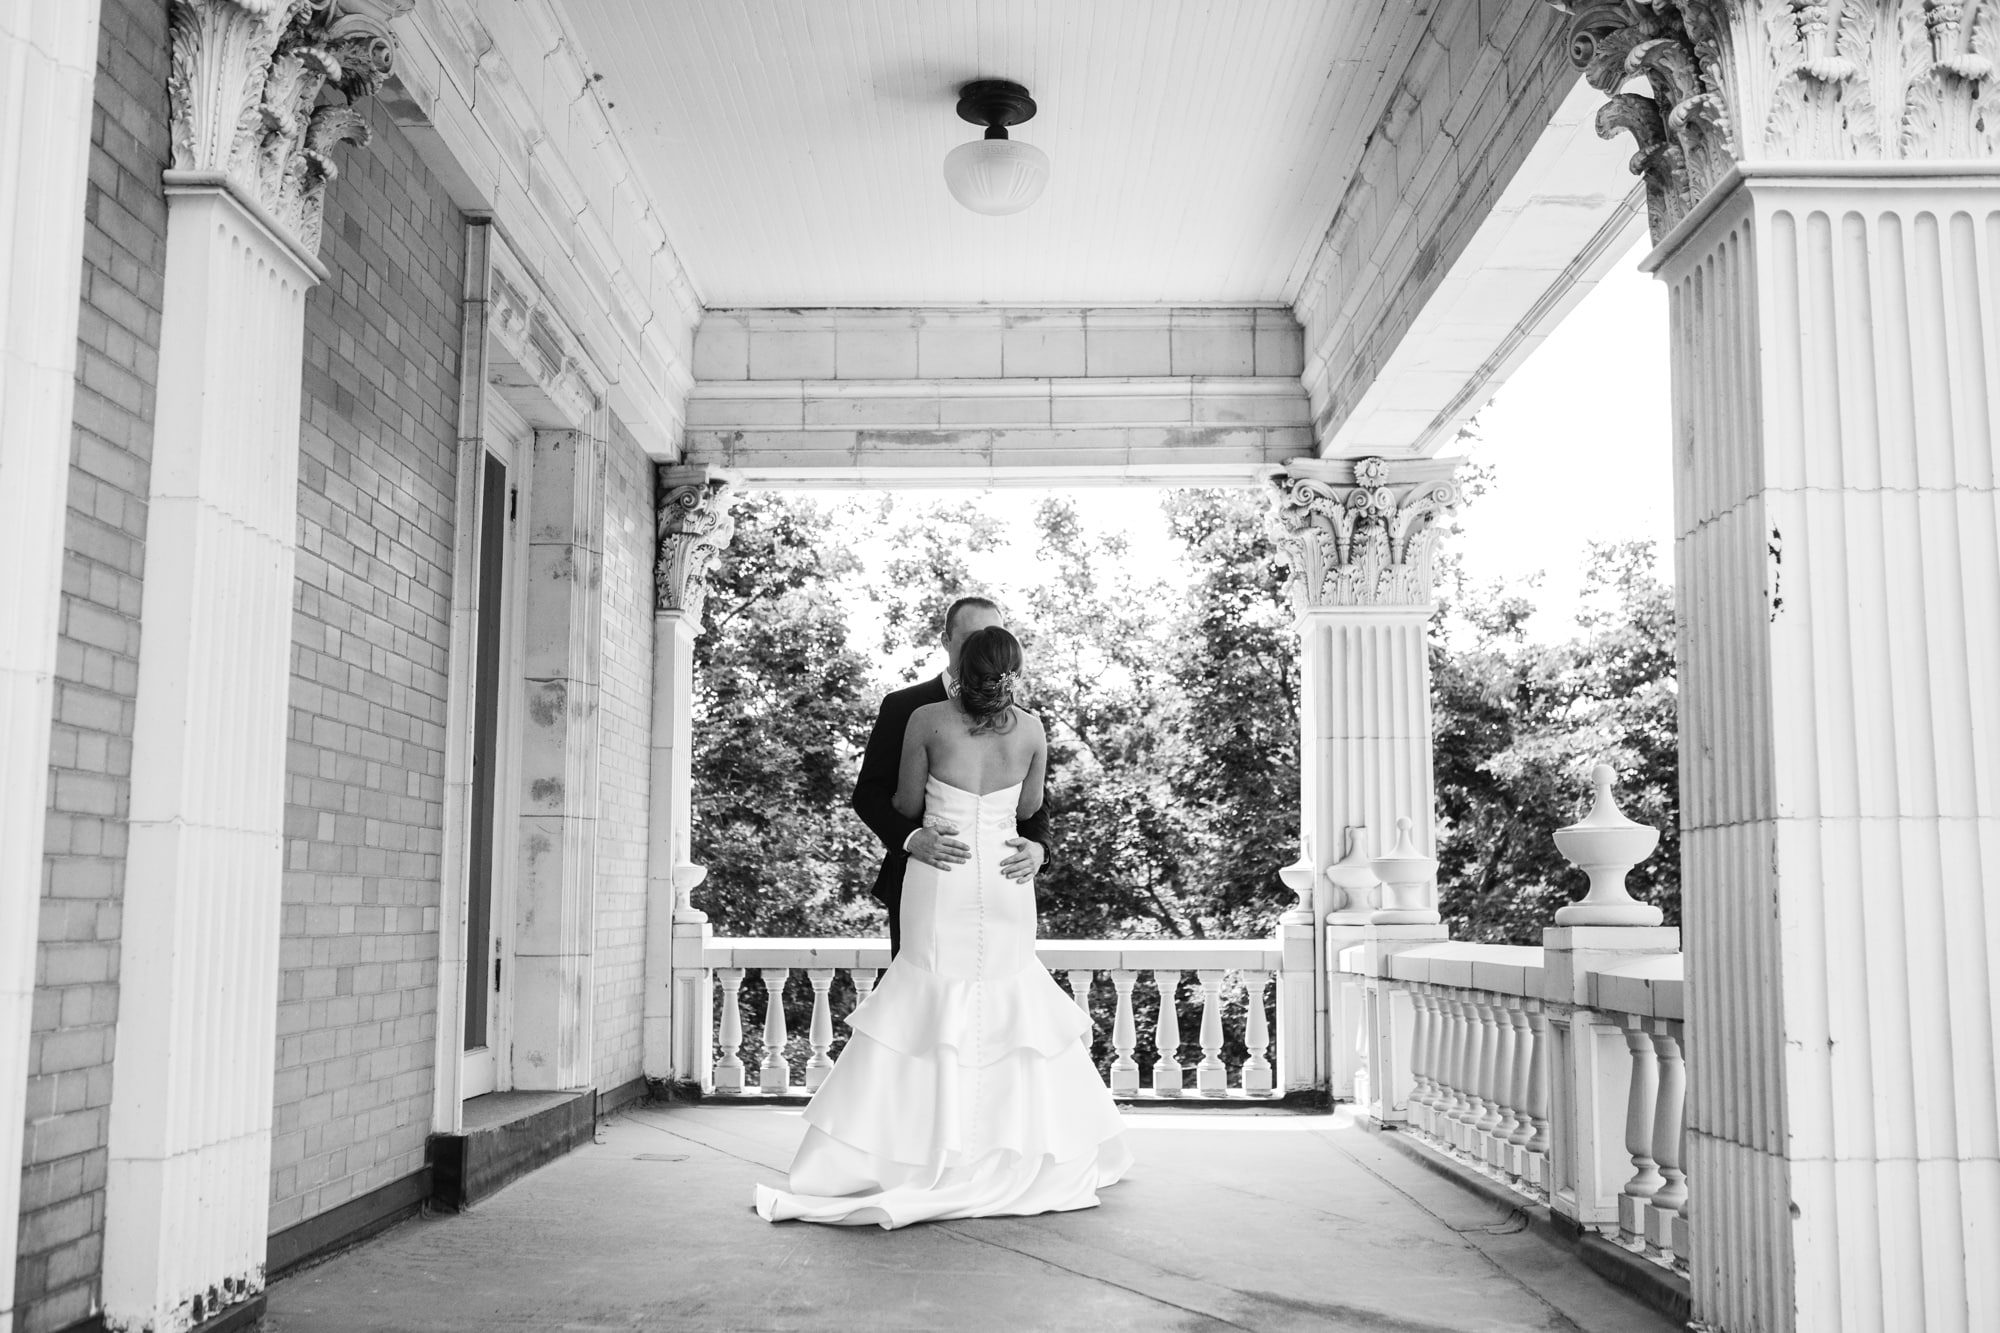 grant Humphreys mansion denver, grant Humphreys mansion, wedding first look, denver wedding, denver wedding photographer, first look locations, bride and groom first look, outdoor first look, should we do a first look wedding, first look pro con